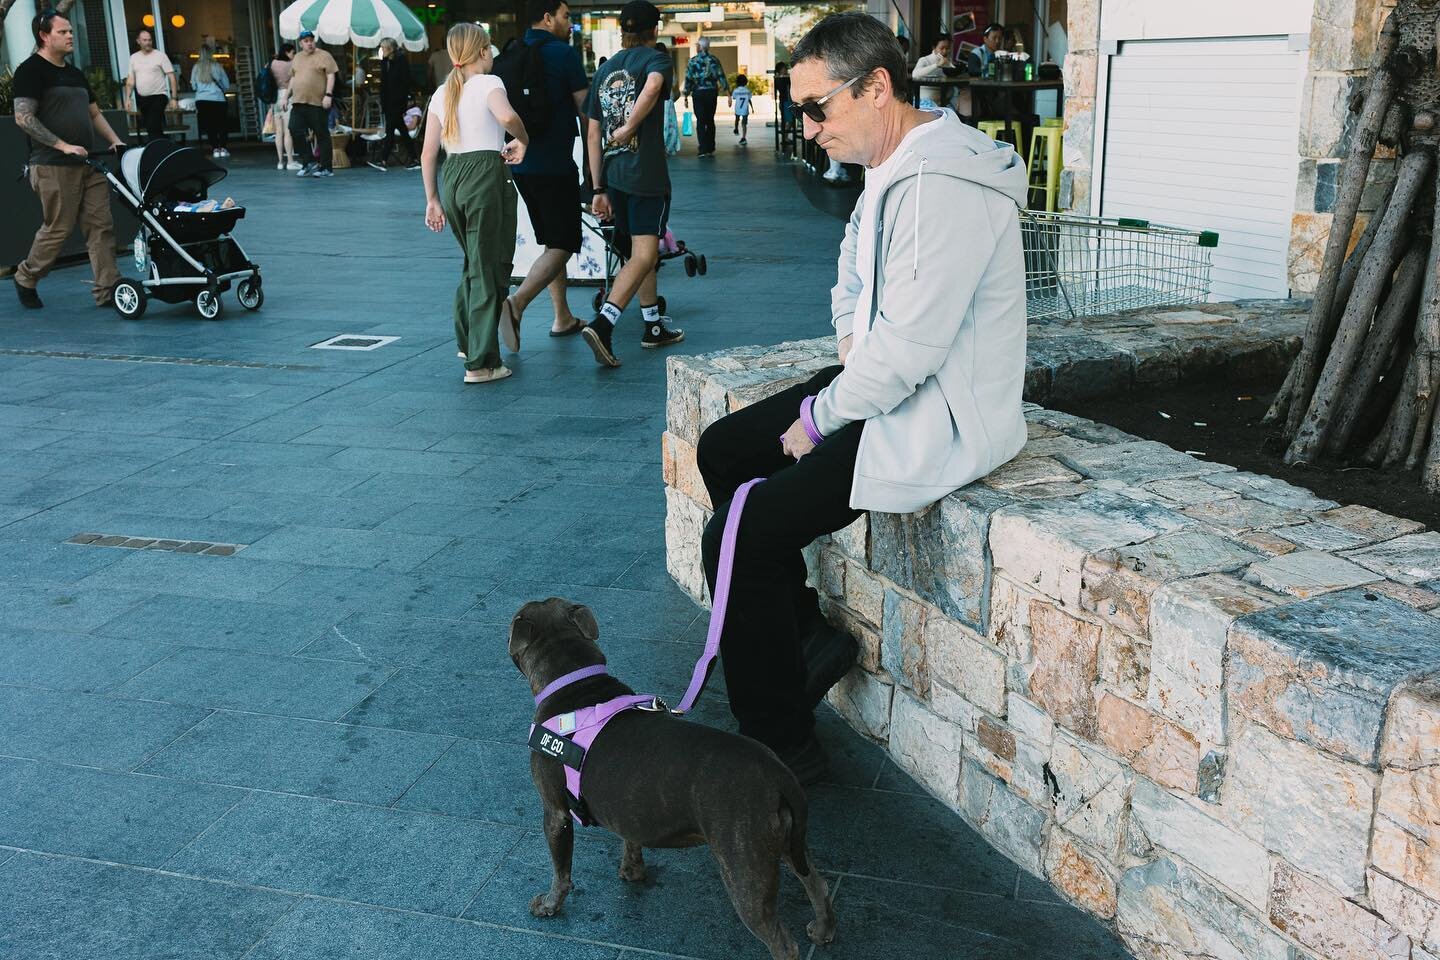 Man&rsquo;s best friend 
.
.
.
.
.

#photooftheday #photography #streetphotography #street_photography #street_killerz #street_in_motion #streetphotographers #street_photo_daily #canonaustralia #canonr6 #canonphotography #opticalwander #cpphotos #rao